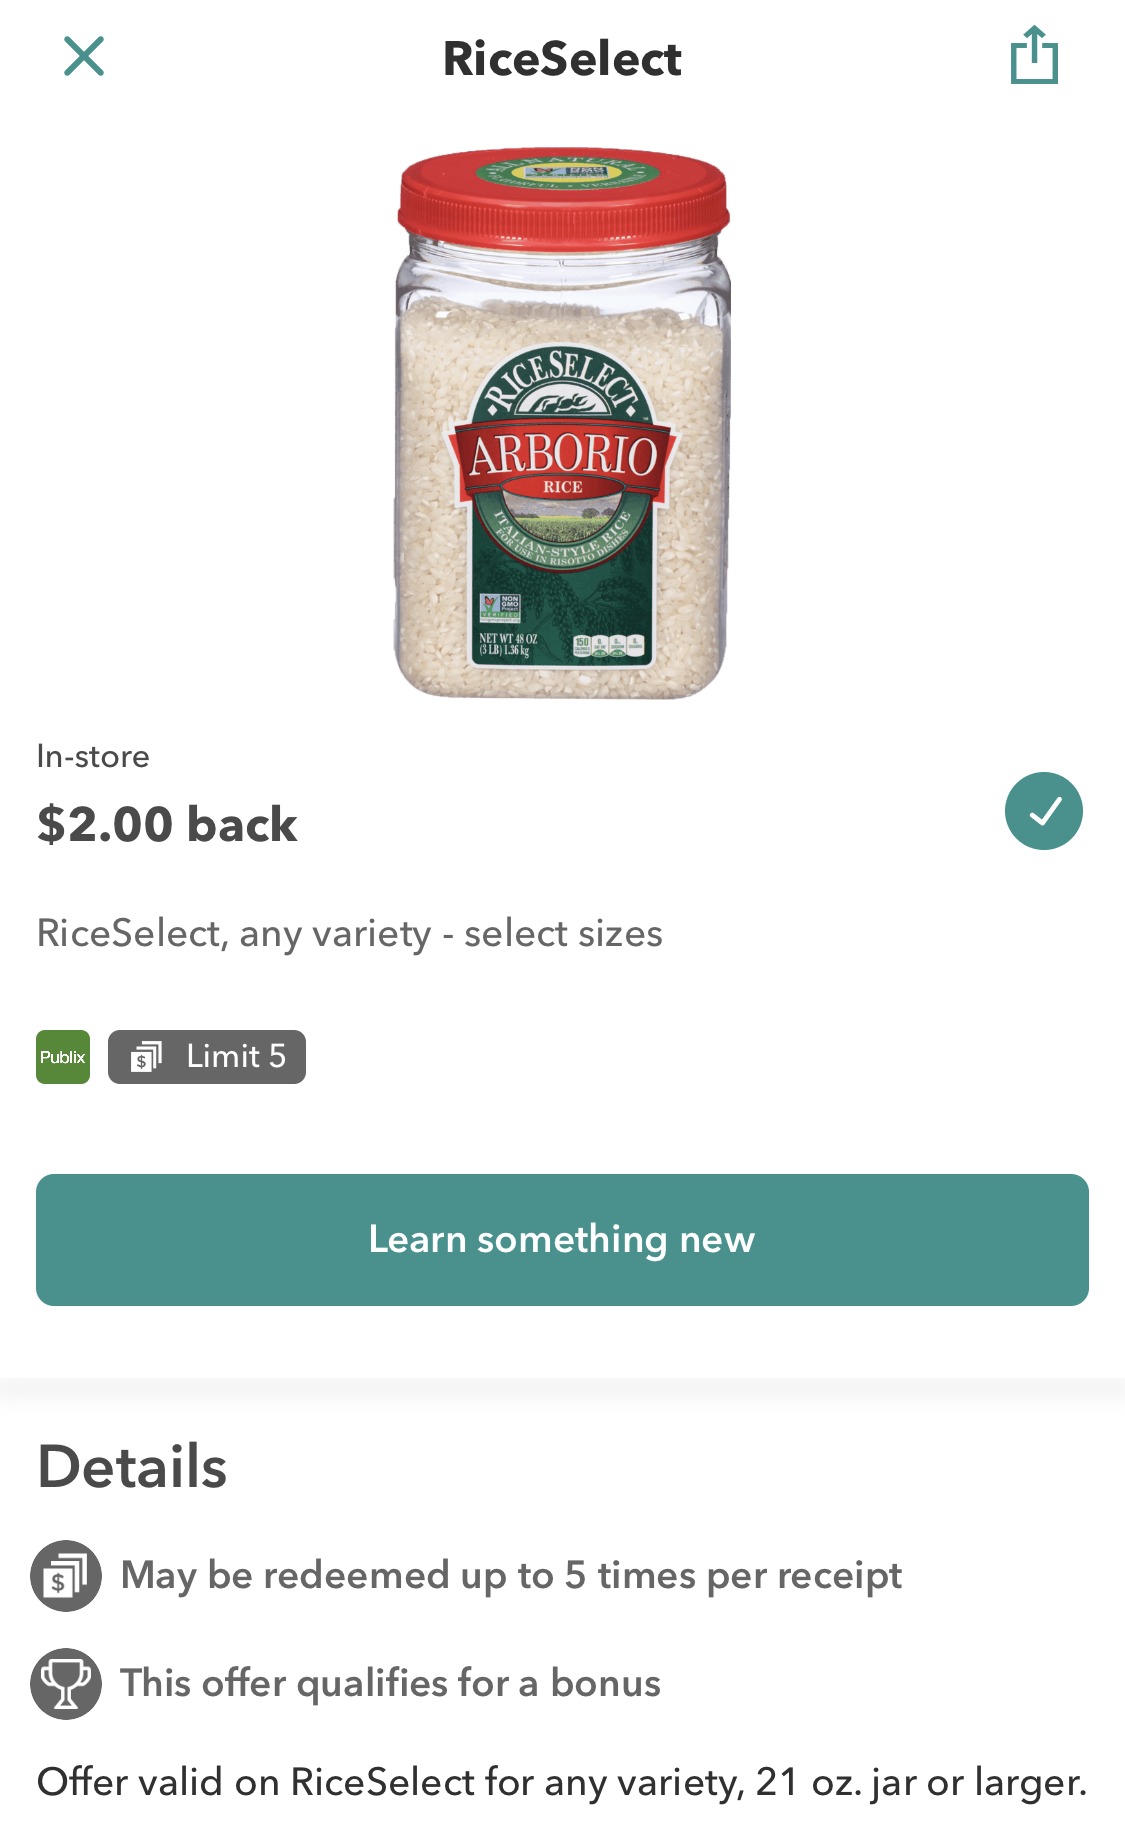 Big Savings On All Your Fa $2 On RiceSelect® Products At Publix on I Heart Publix